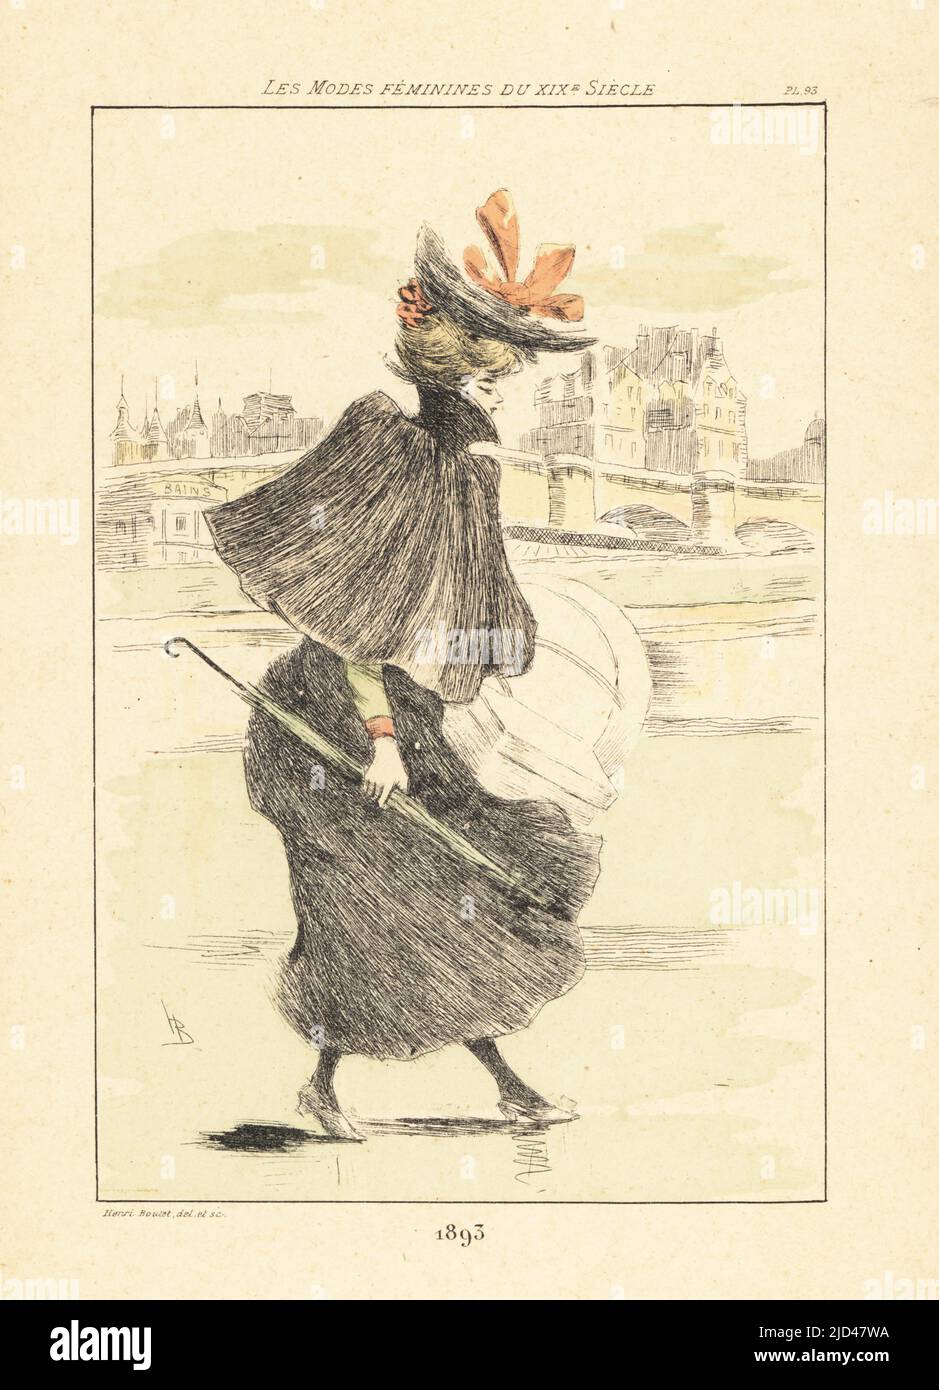 Fashionable woman promenading on the banks of the Seine, in front of the Bains de la Samaritaine, Paris, 1893. The hot baths were built in 1761 near Pont Neuf and sank in a flood in 1919. She wears a hat, high-collar cape, dress, holding a parasol and hat boxes. Handcoloured drypoint or pointe-seche etching by Henri Boutet from Les Modes Feminines du XIXeme Siecle (Female Fashions of the 19th Century), Ernest Flammarion, Paris, 1902. Boutet (1851-1919) was a French artist, engraver, lithographer and designer. Stock Photo